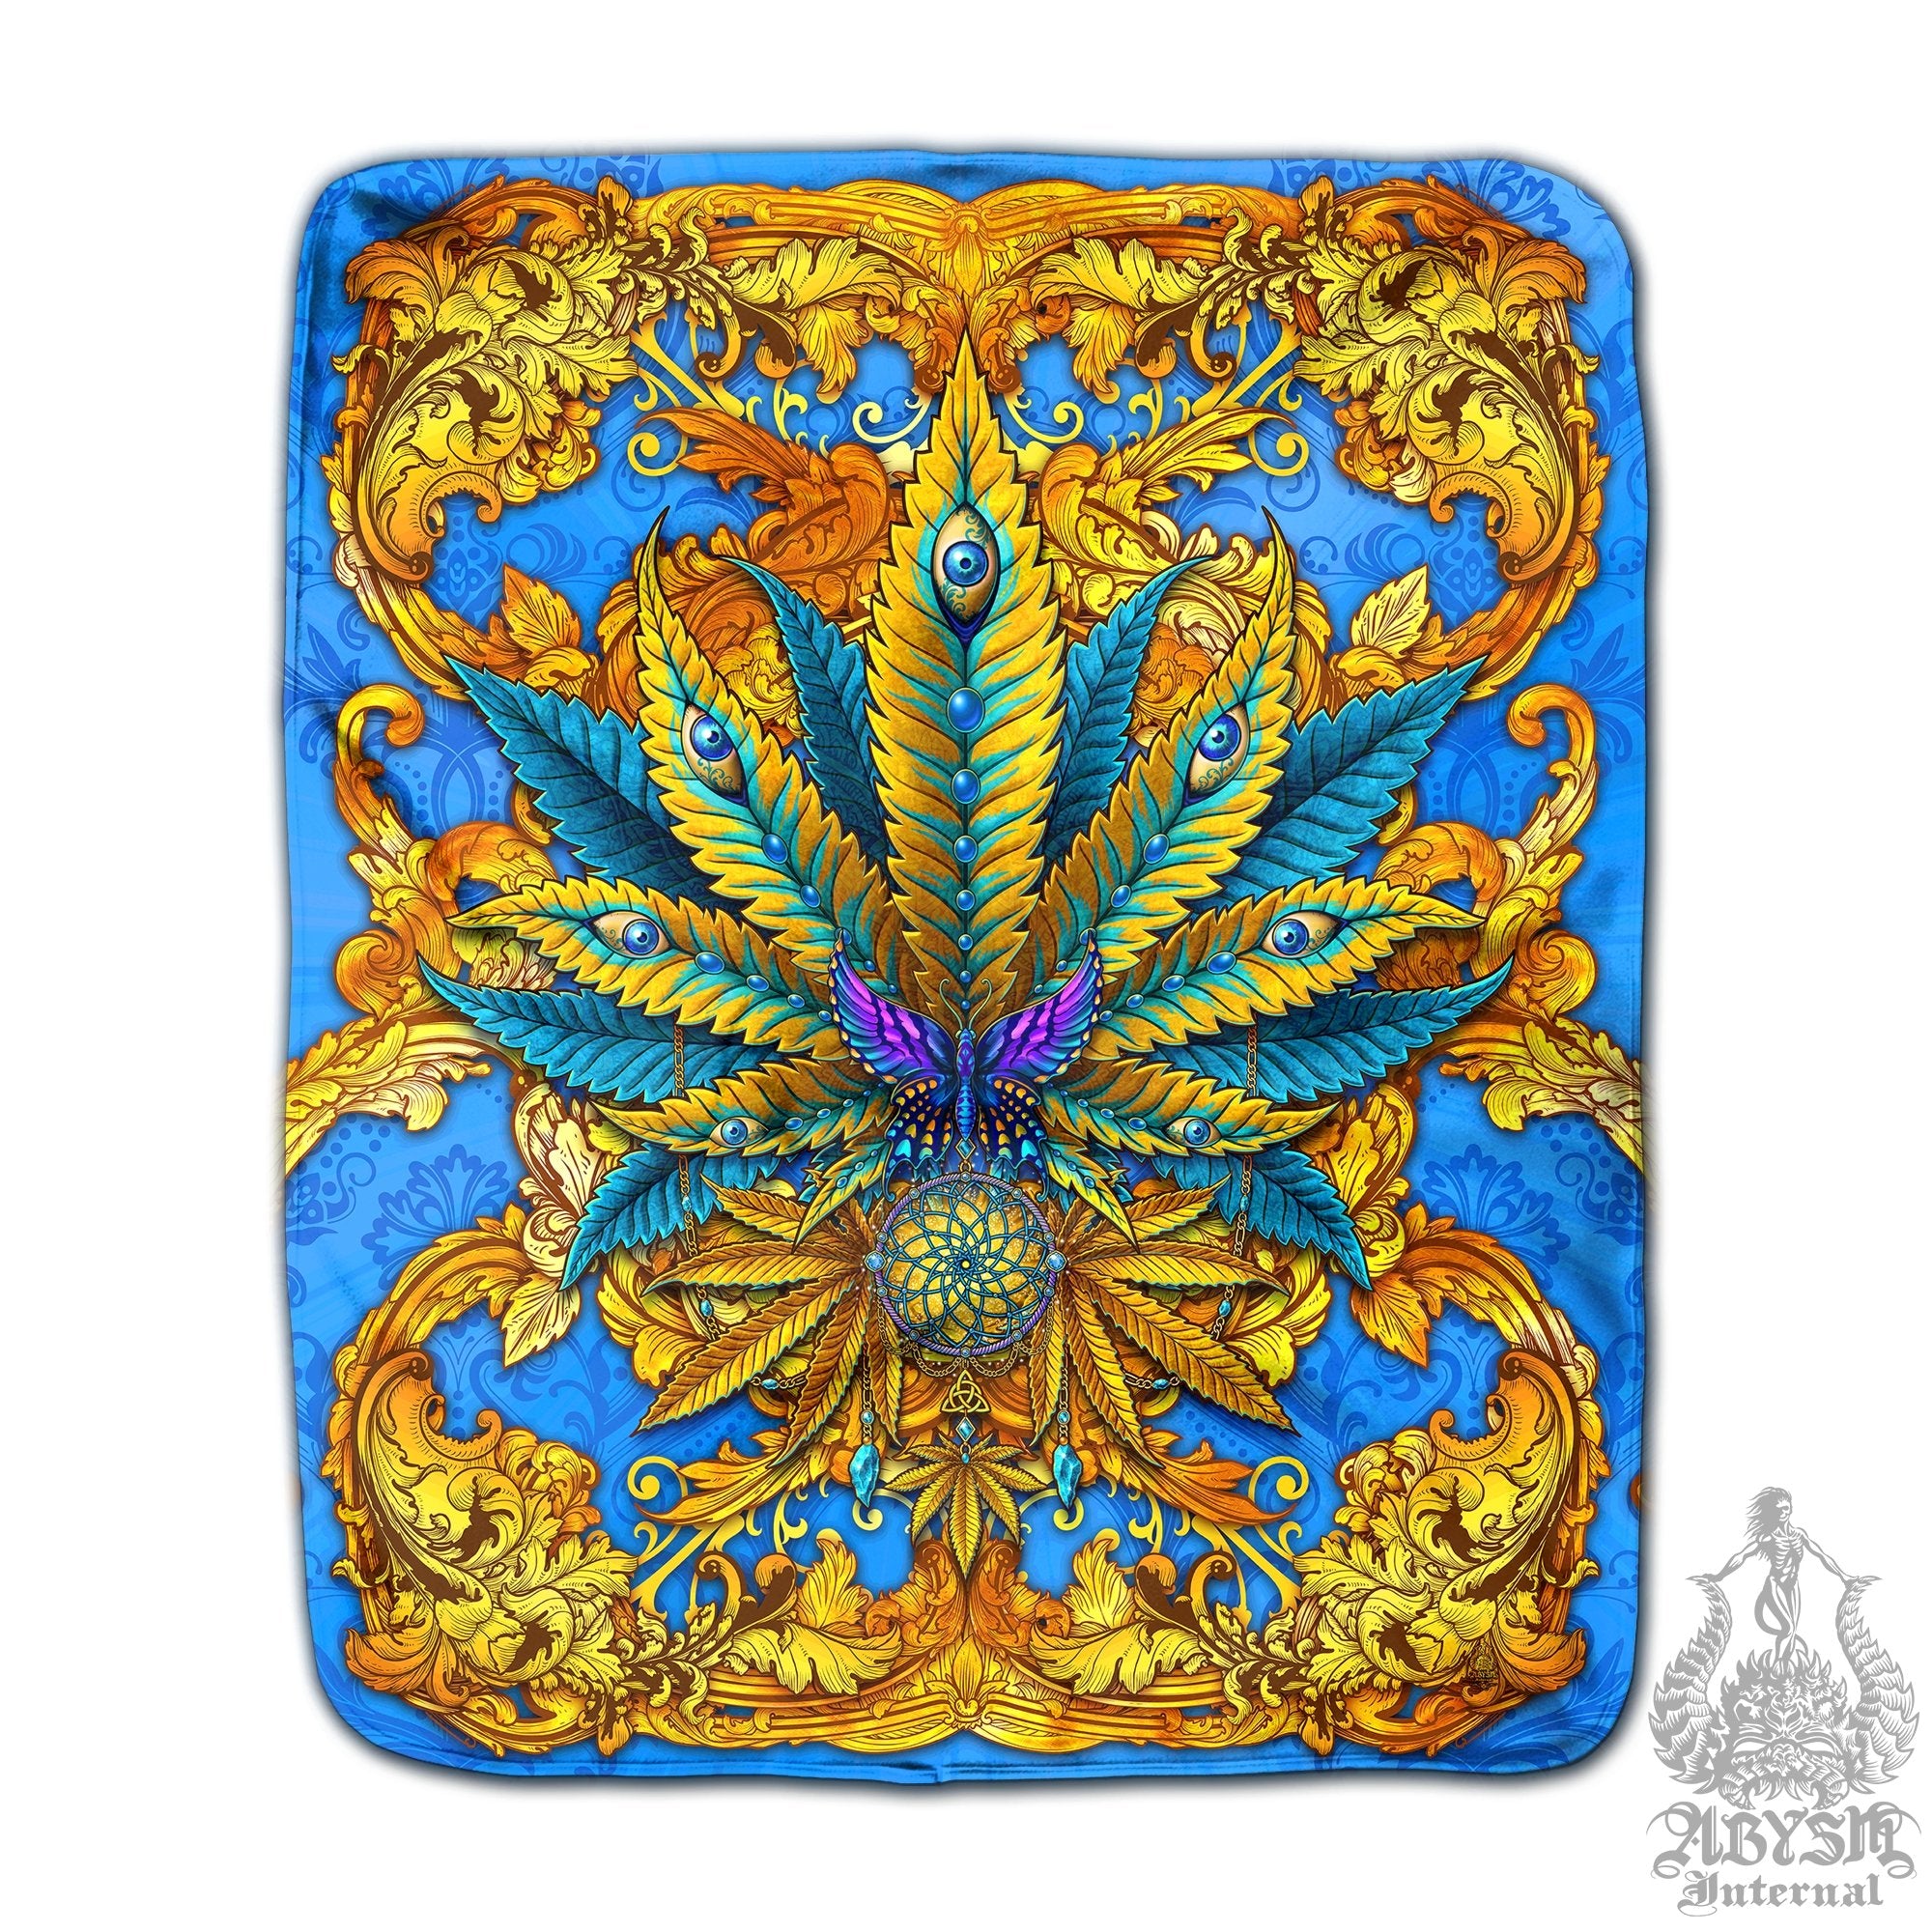 Weed Throw Fleece Blanket, Cannabis Art, Indie and Hippie Home Decor, 420 Gift - Cyan and Gold - Abysm Internal